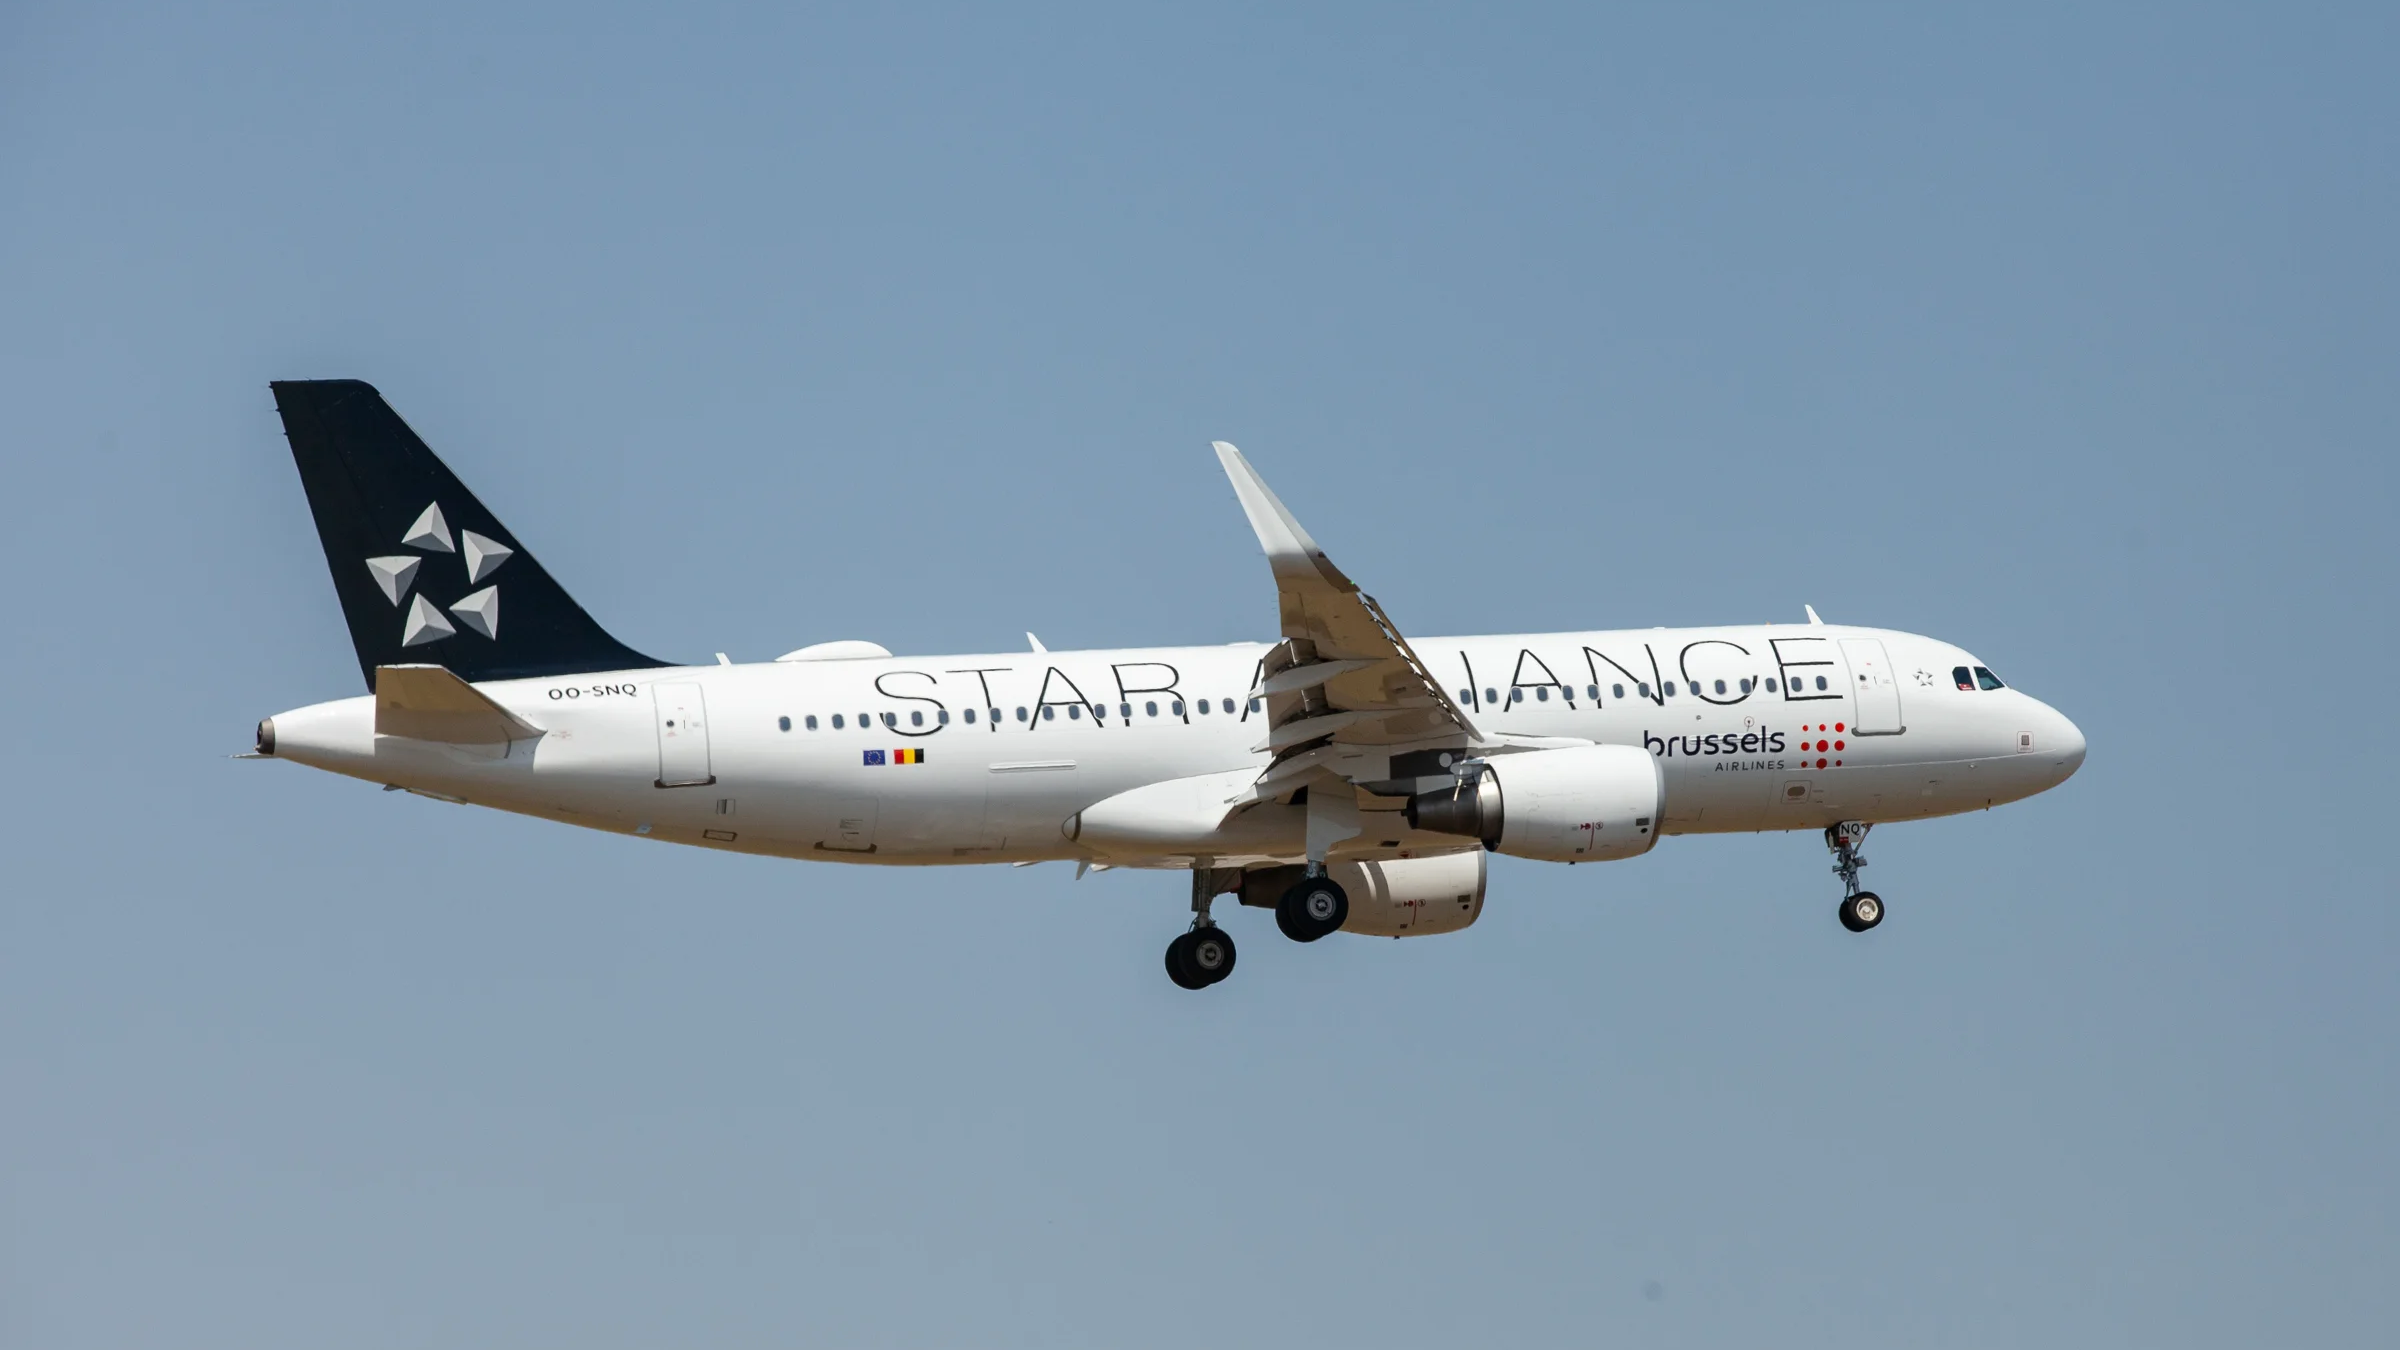 Star Alliance provides its fleet for Brussels Airlines.